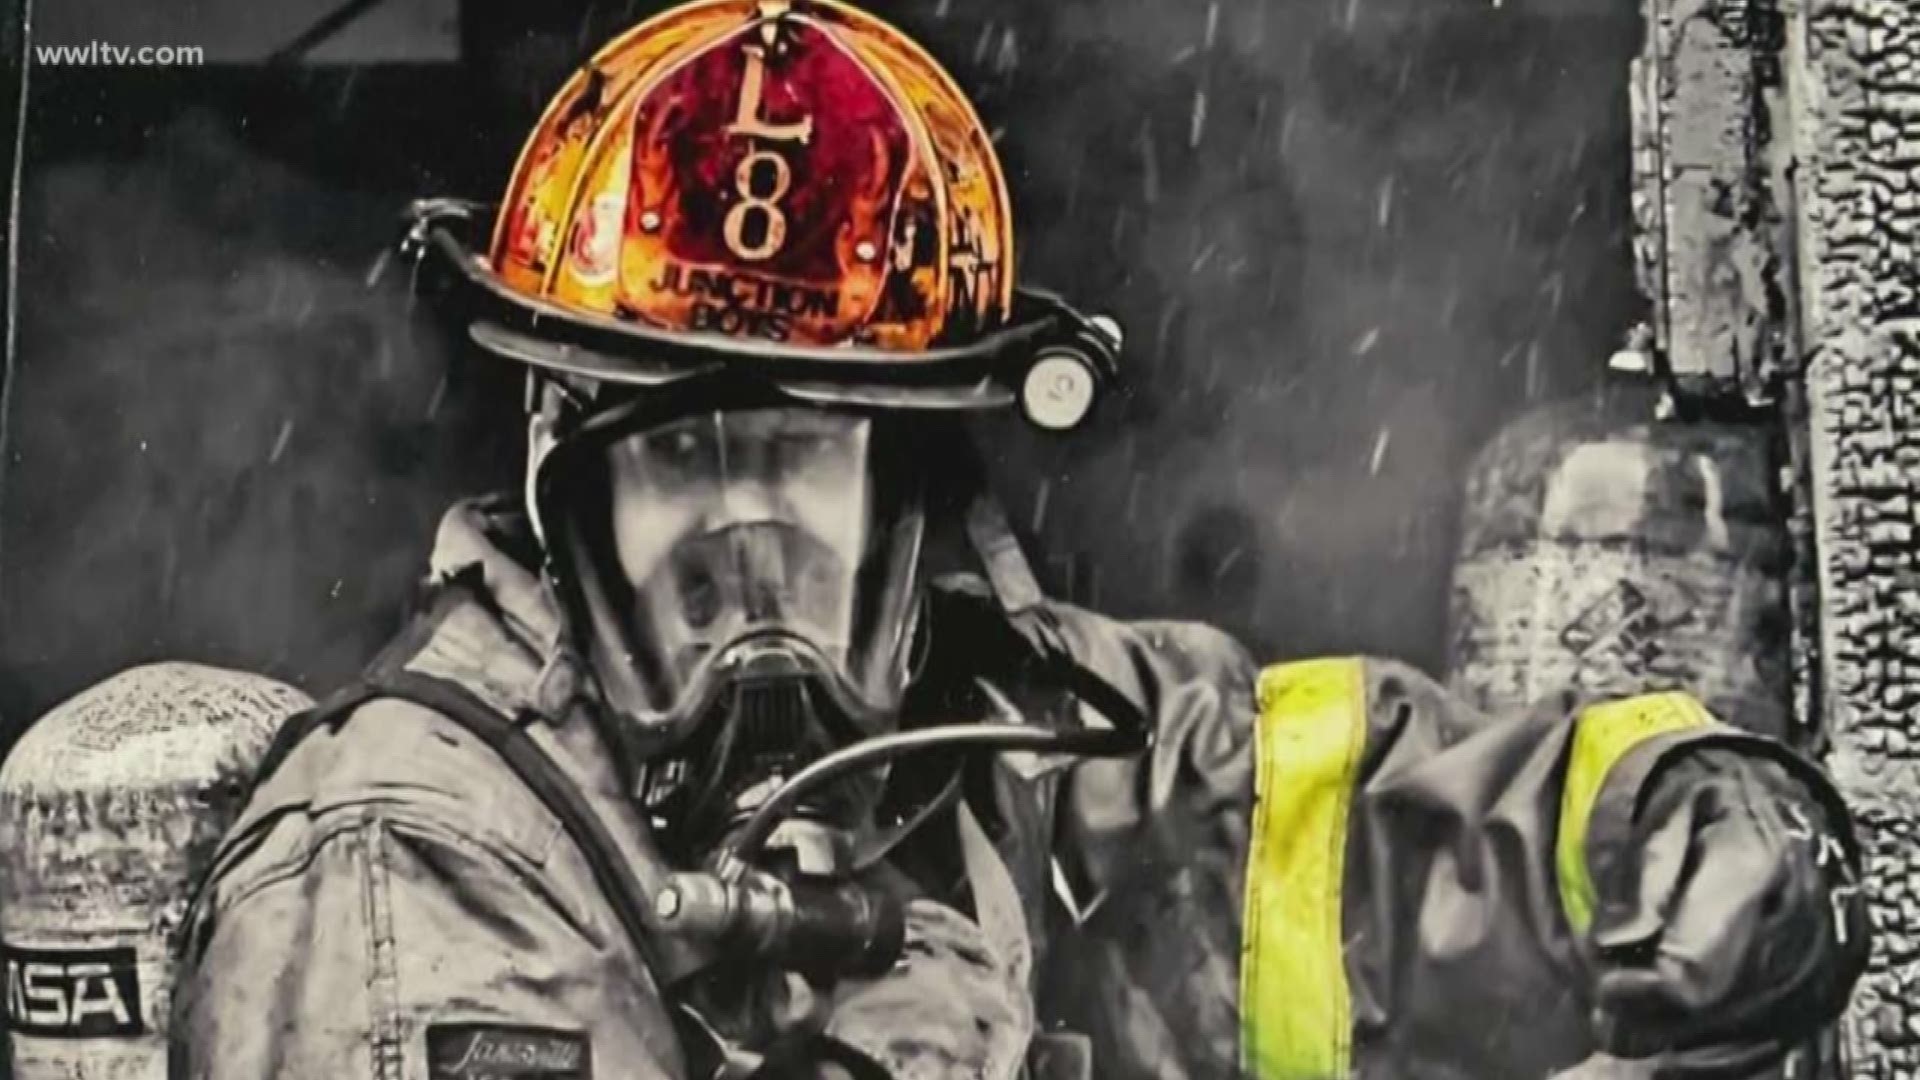 Firefighter Danny Ziegler is reportedly starting the road to recovery after being hospitalized in critical condition battling a 2-alarm fire last weekend.